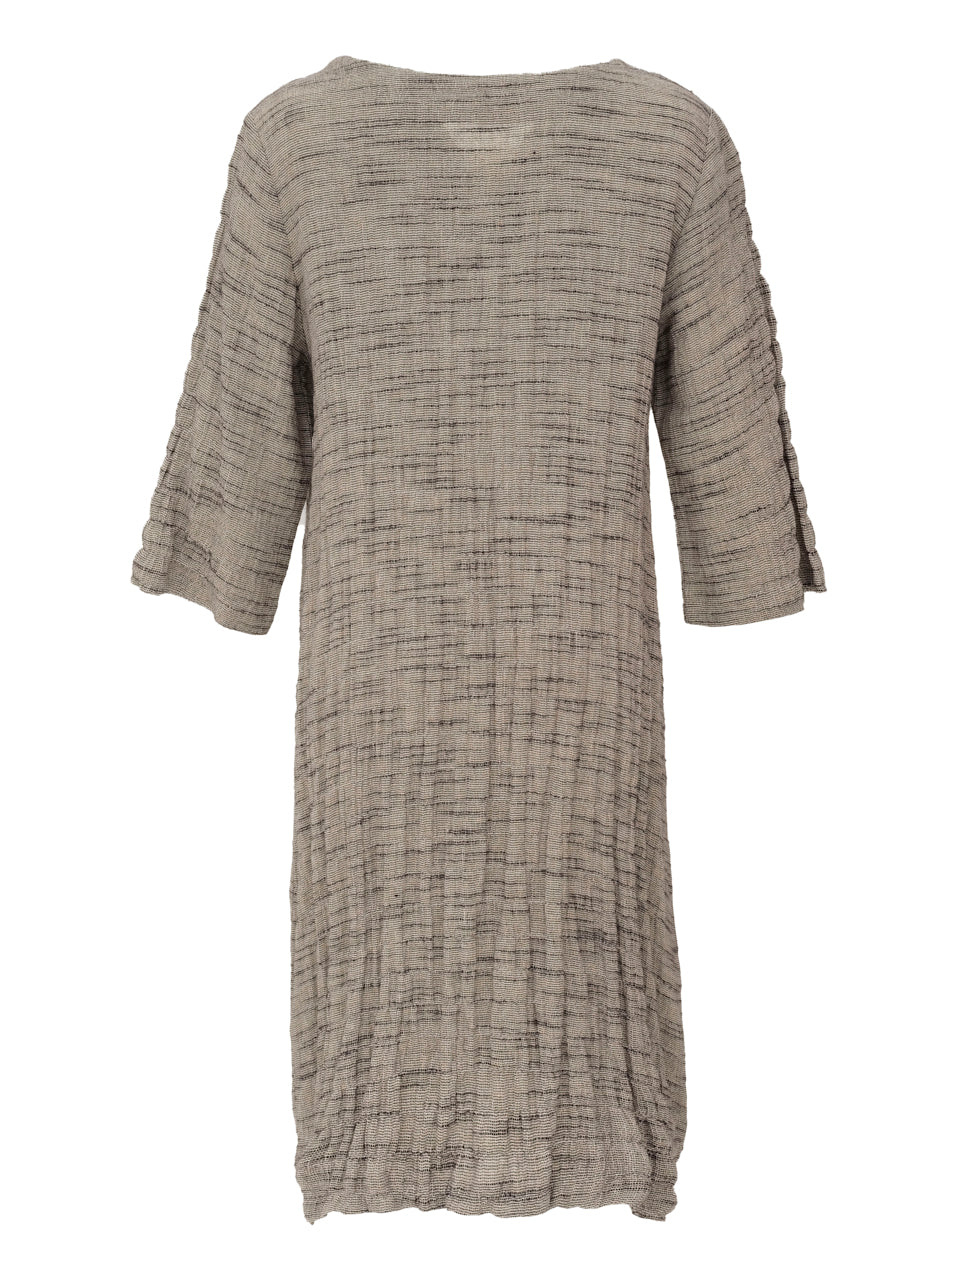 Ever Sassy Spring 2023 women's casual relaxed fitting loose cotton and linen dress - product back